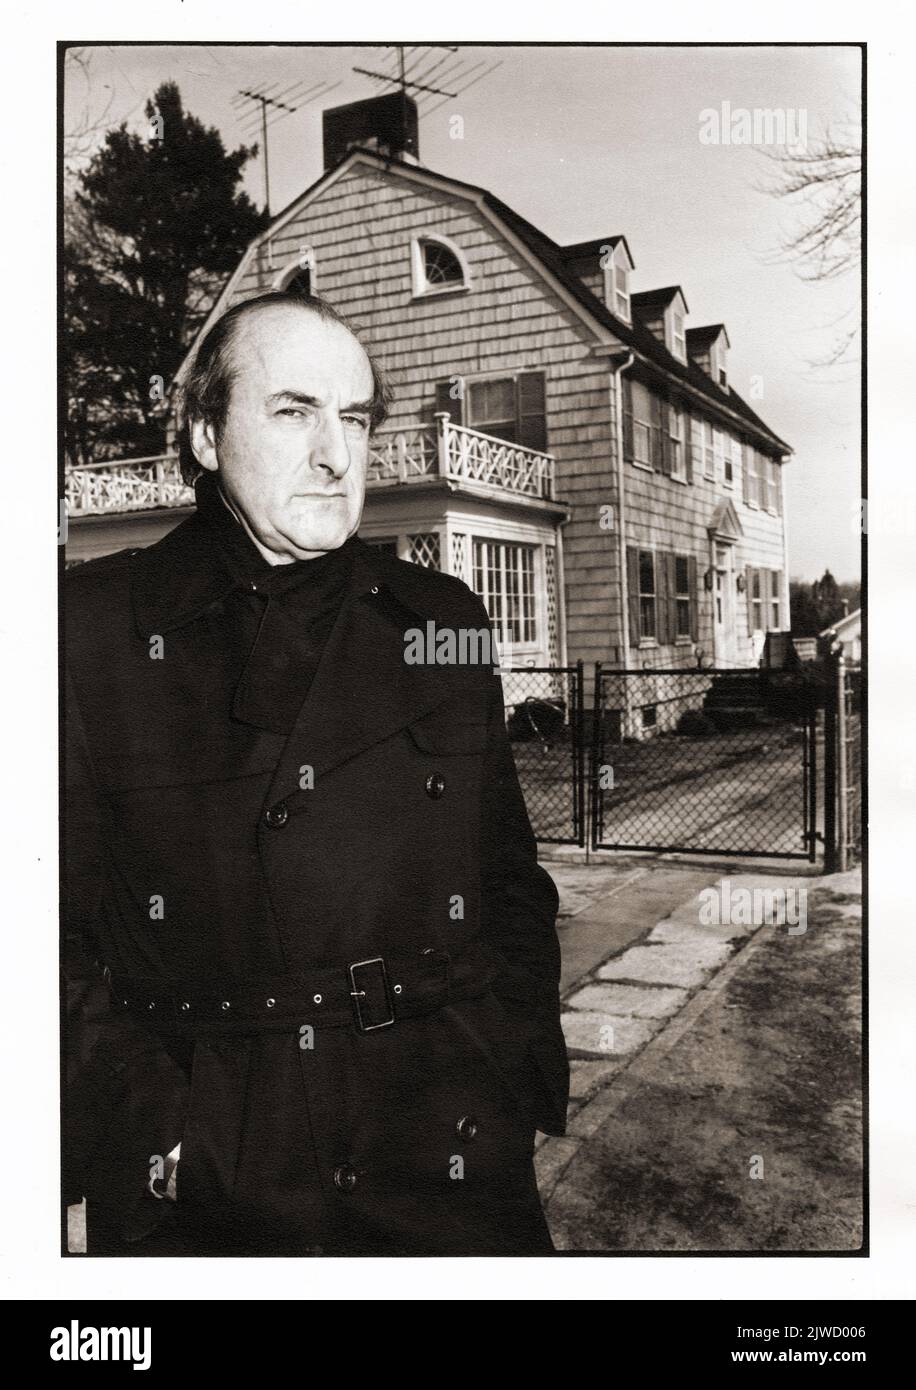 Posed portrait of the late Austrian American author and Parapsychologist Hans Holzer in front of the infamous Amityville Horror House. He investigated the paranormal, ghosts & haunted houses. His book debunked the claims in the popular 1979 move, 'The Amityville Horror.' In Amityville, Long Island, 1980. Stock Photo